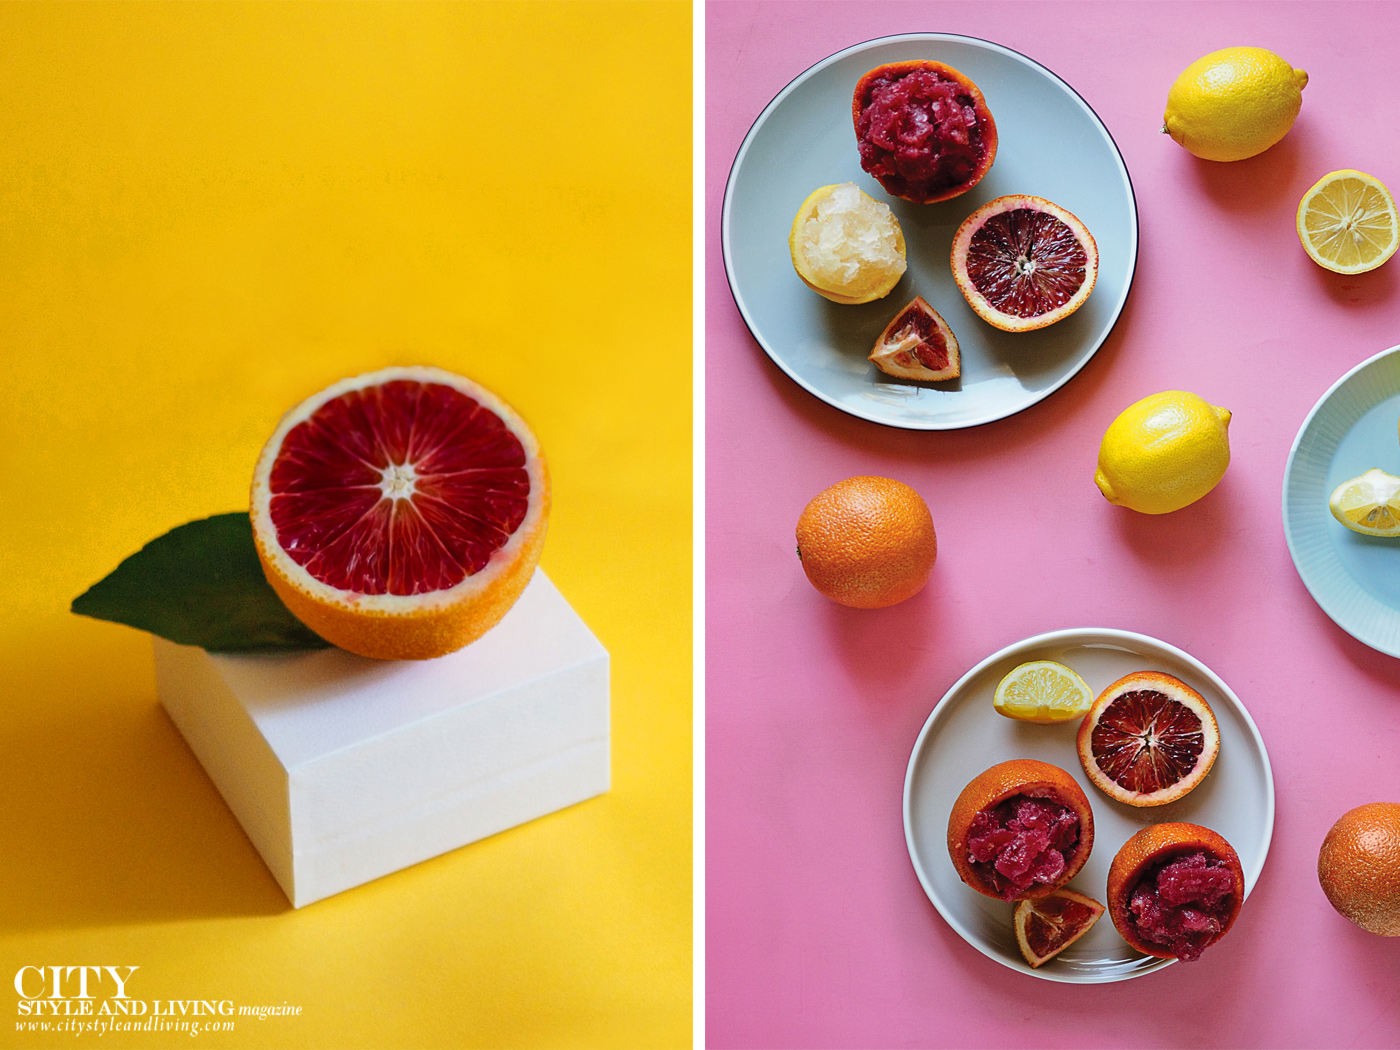 City Style and Living Summer 2021 Citrus Desserts Blood Oranges